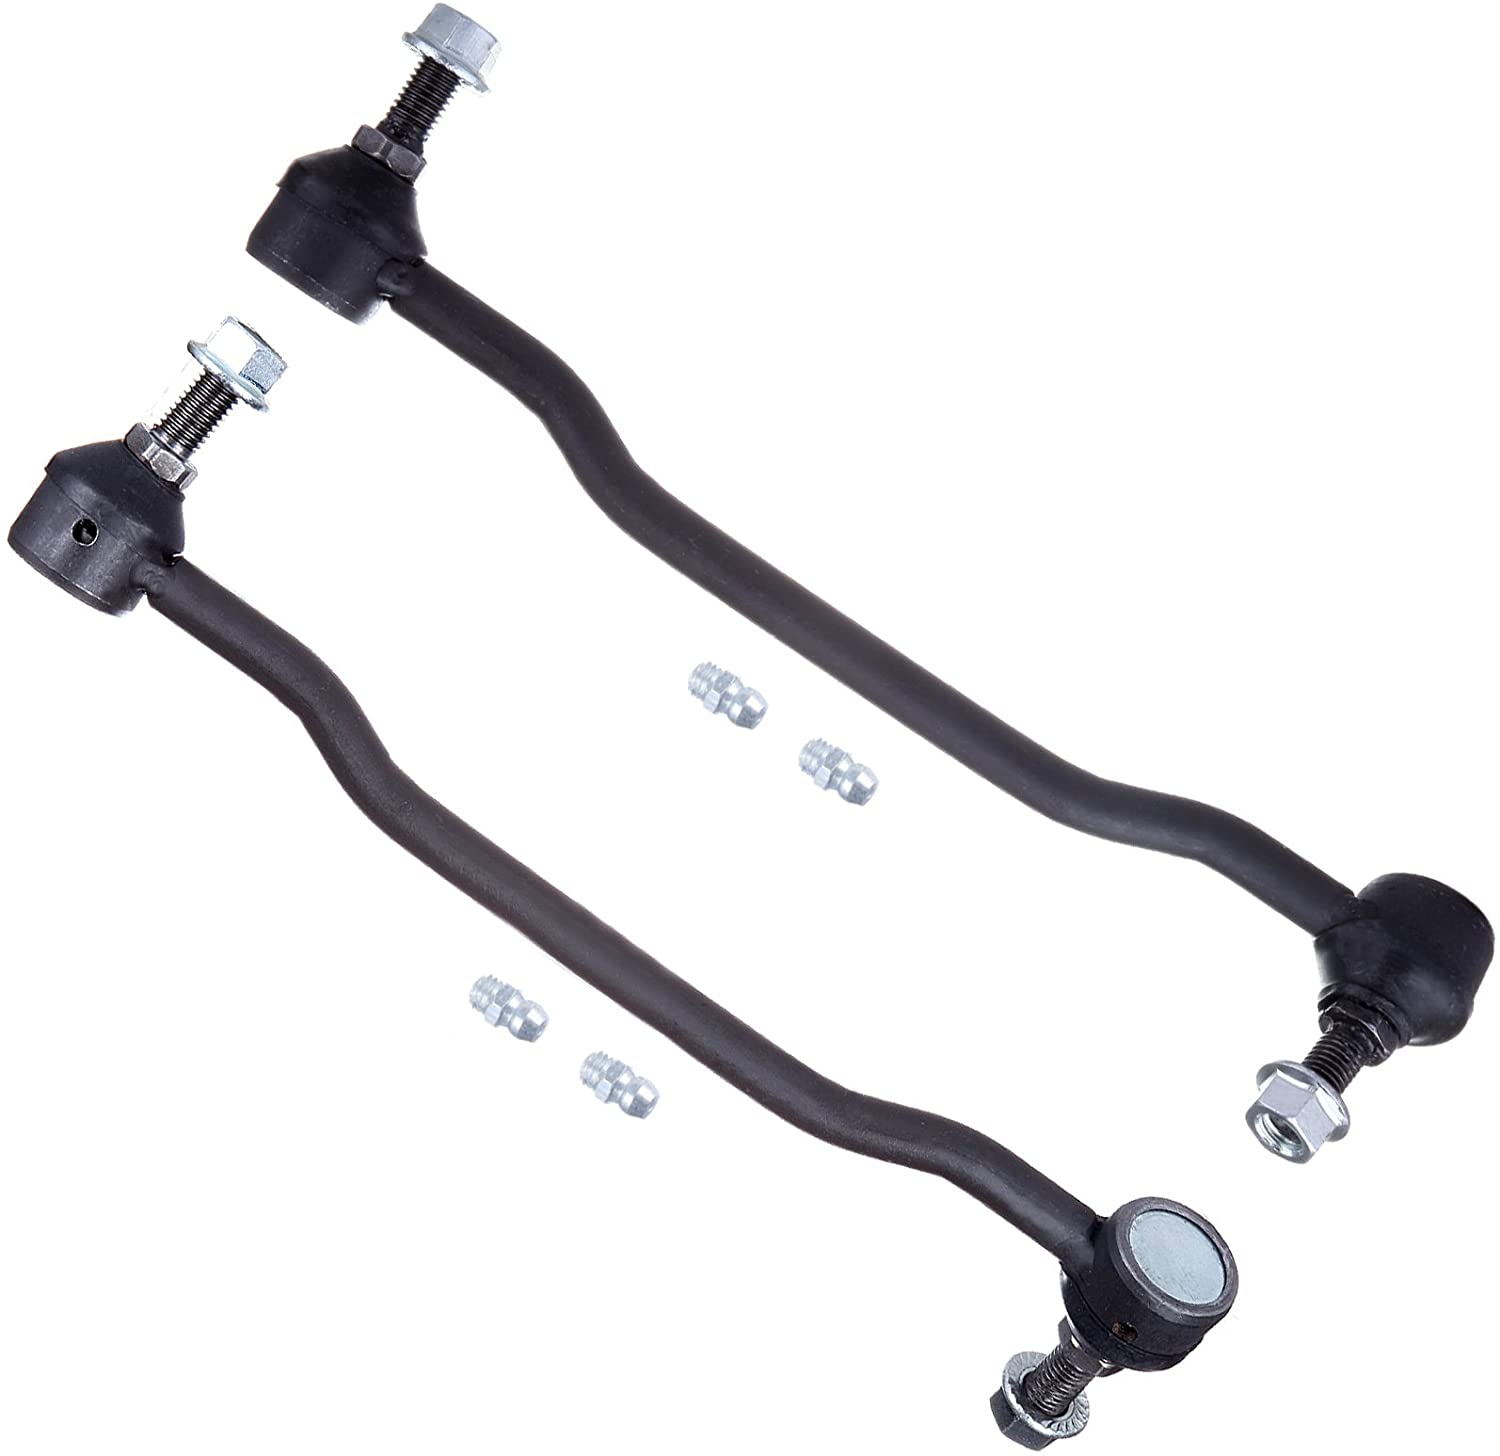 Scitoo Front Sway Bar End Link Pair fit Nissan Altima 2002 2003 2004 2005 2006 Nissan Maxima 2004 2005 2006 2007 2008